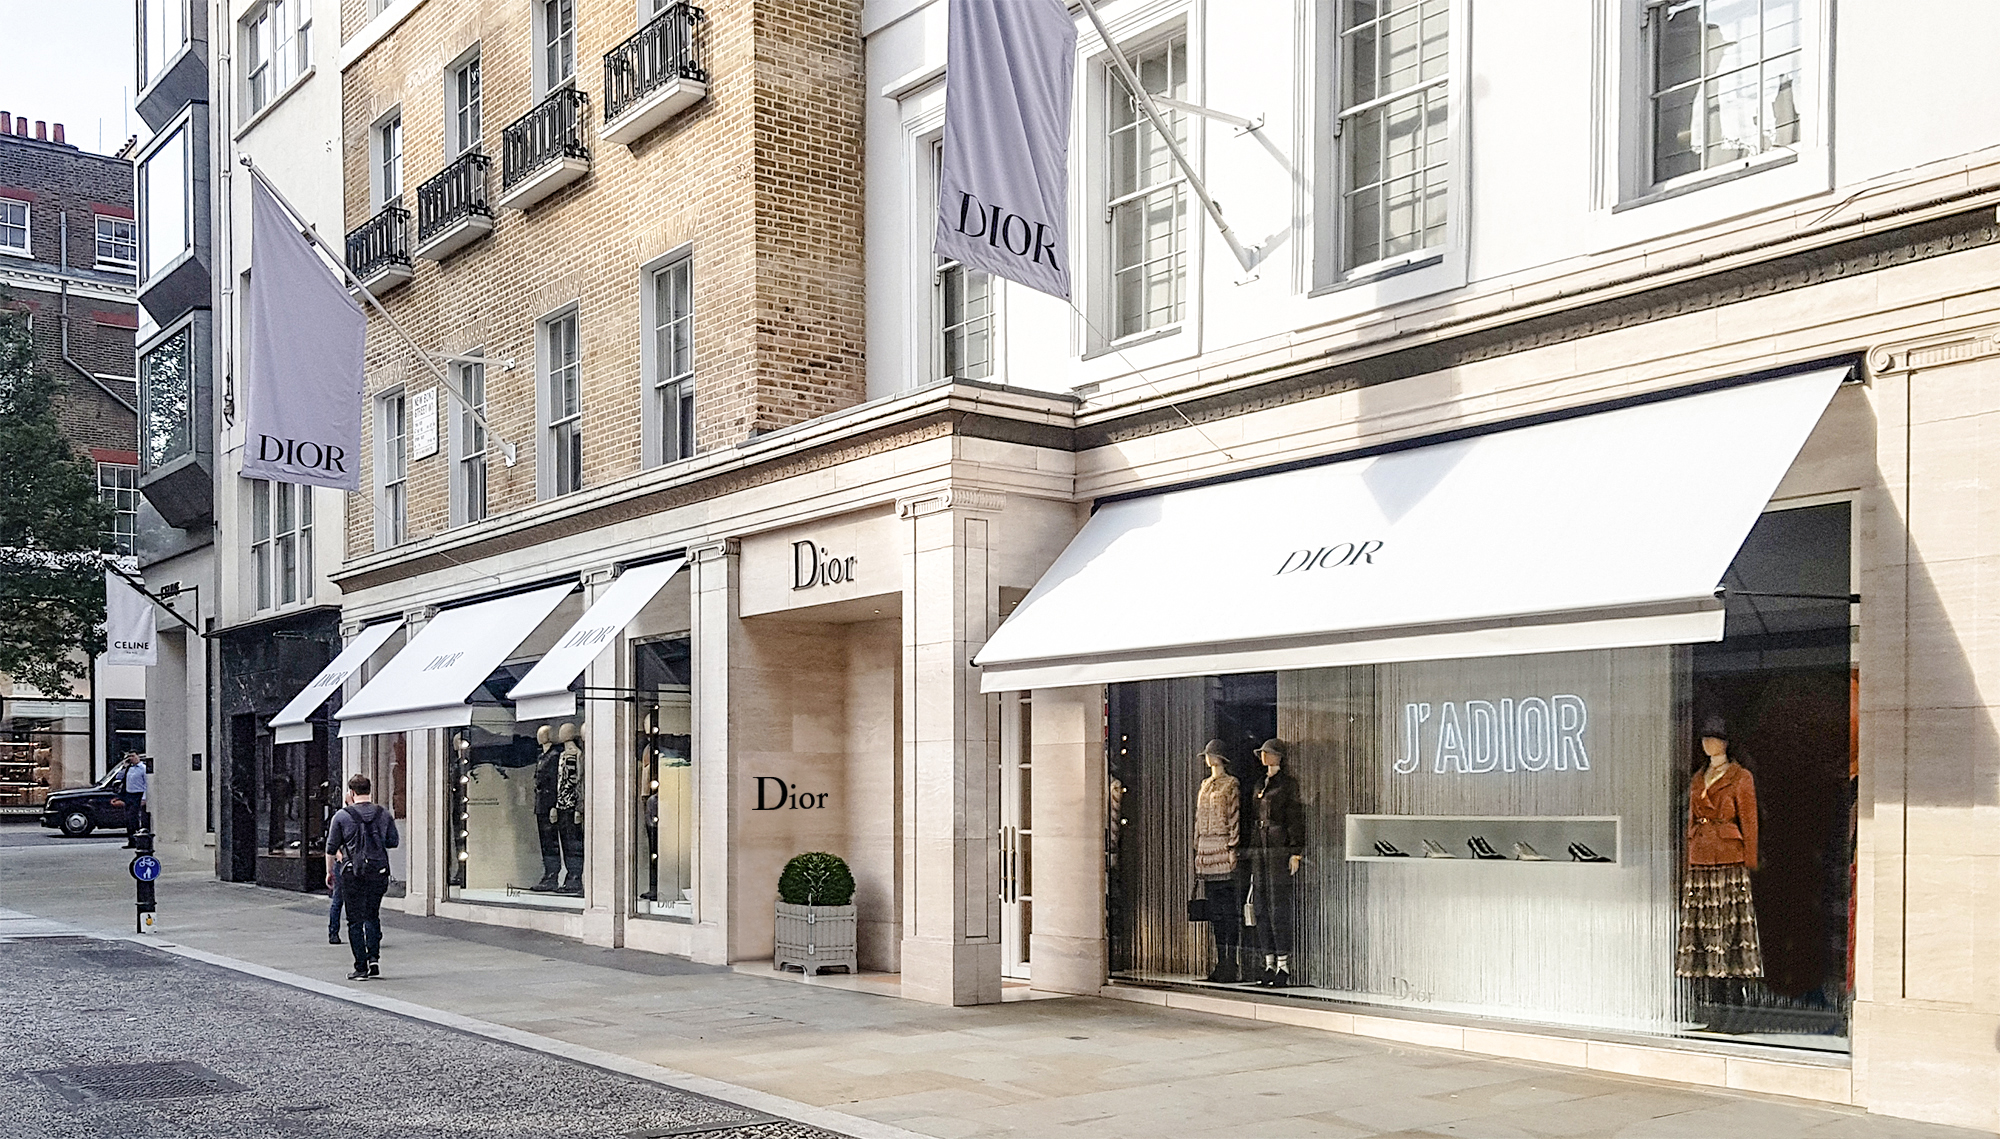 Greenwich awning for DIOR